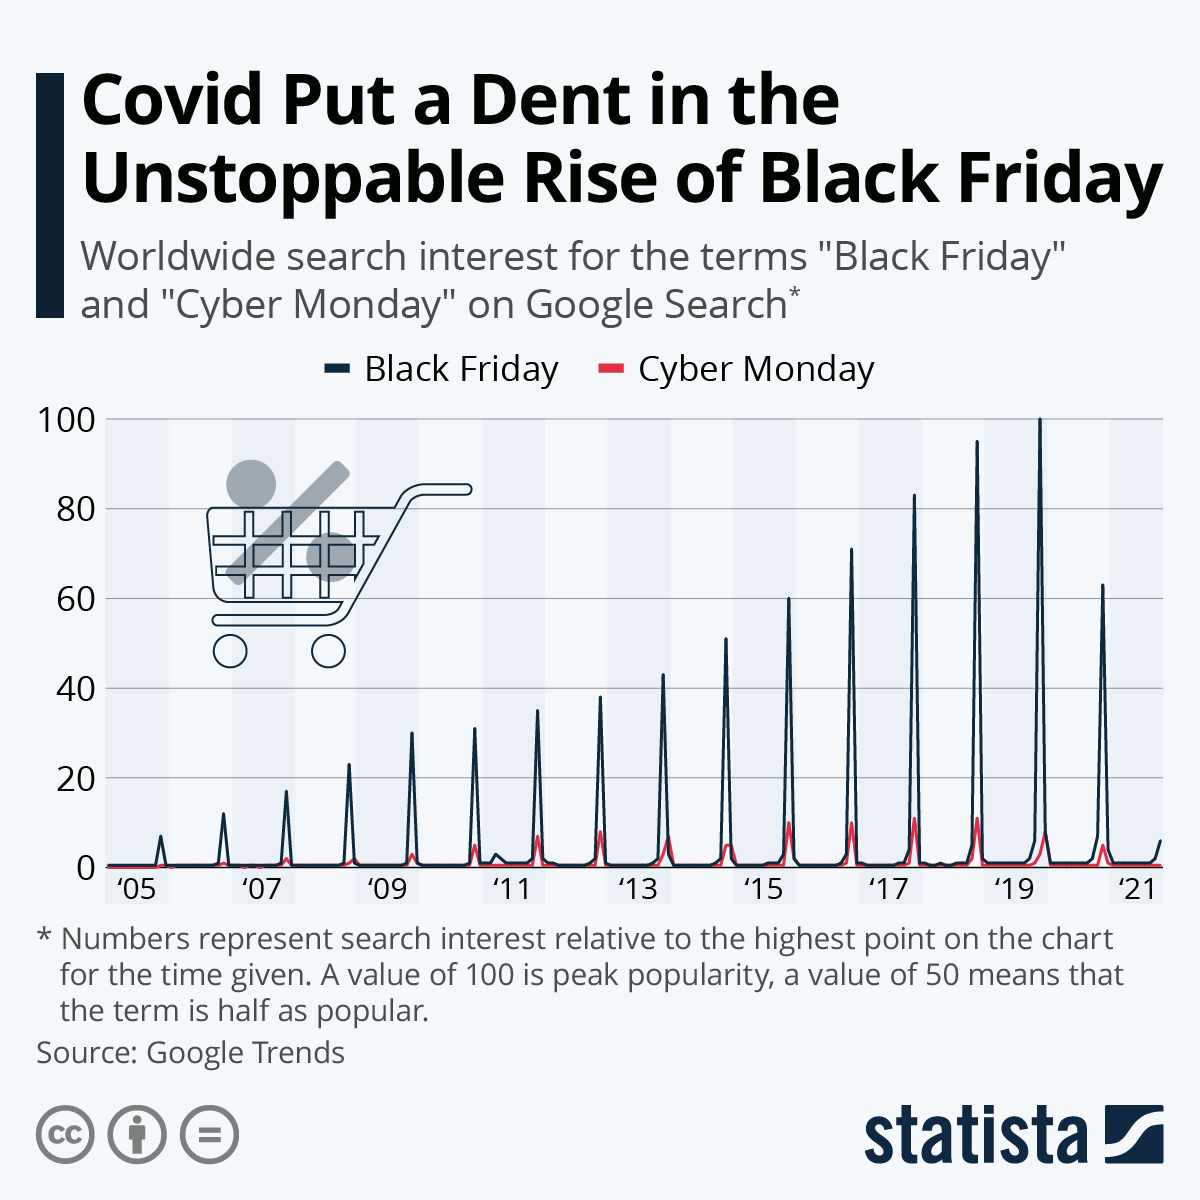 Covid Put a Dent in the Unstoppable Rise of Black Friday
